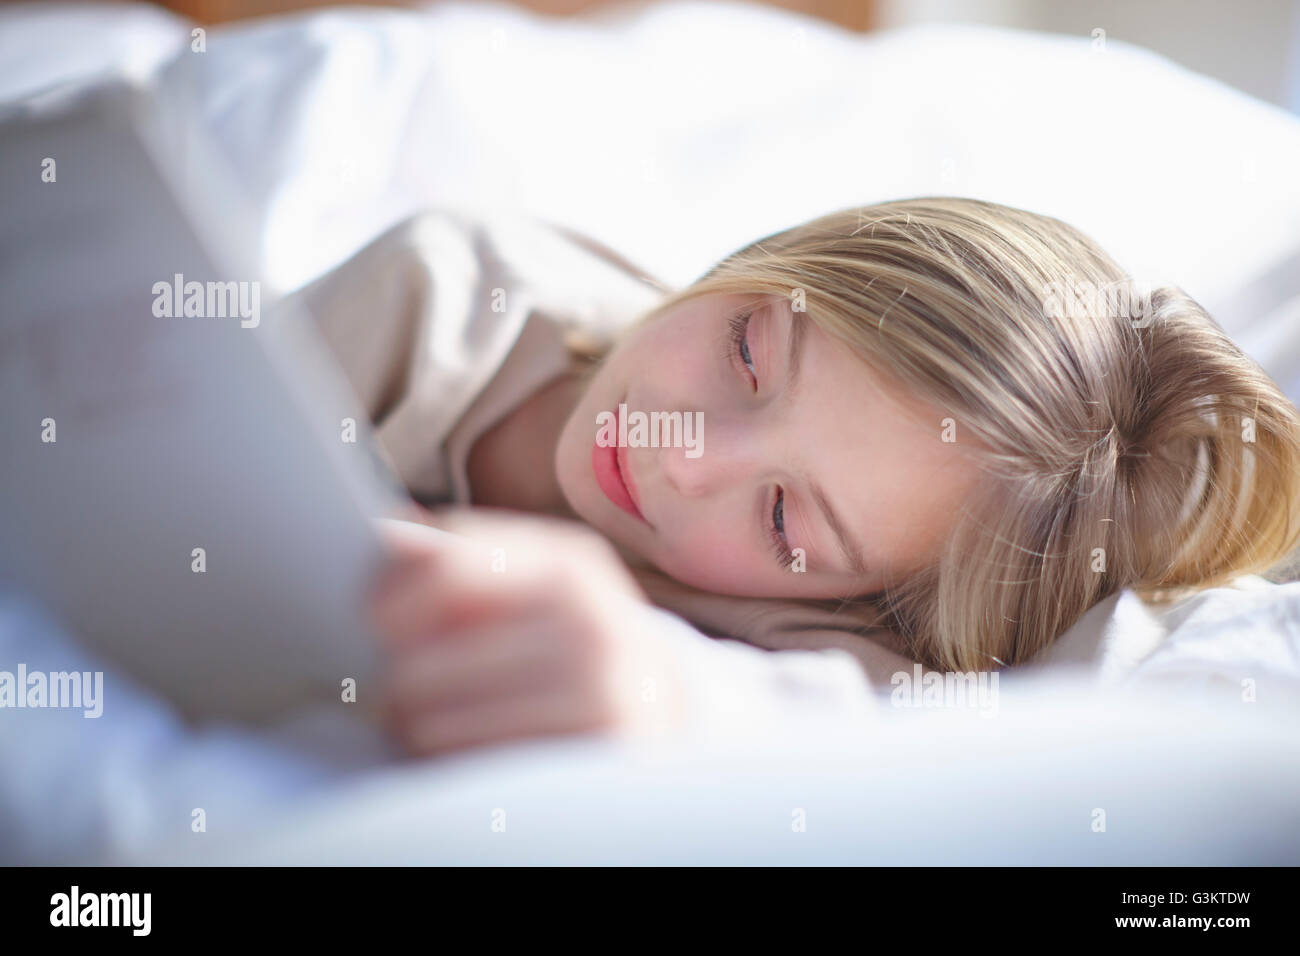 Blond haired girl lying in bed reading a book Stock Photo